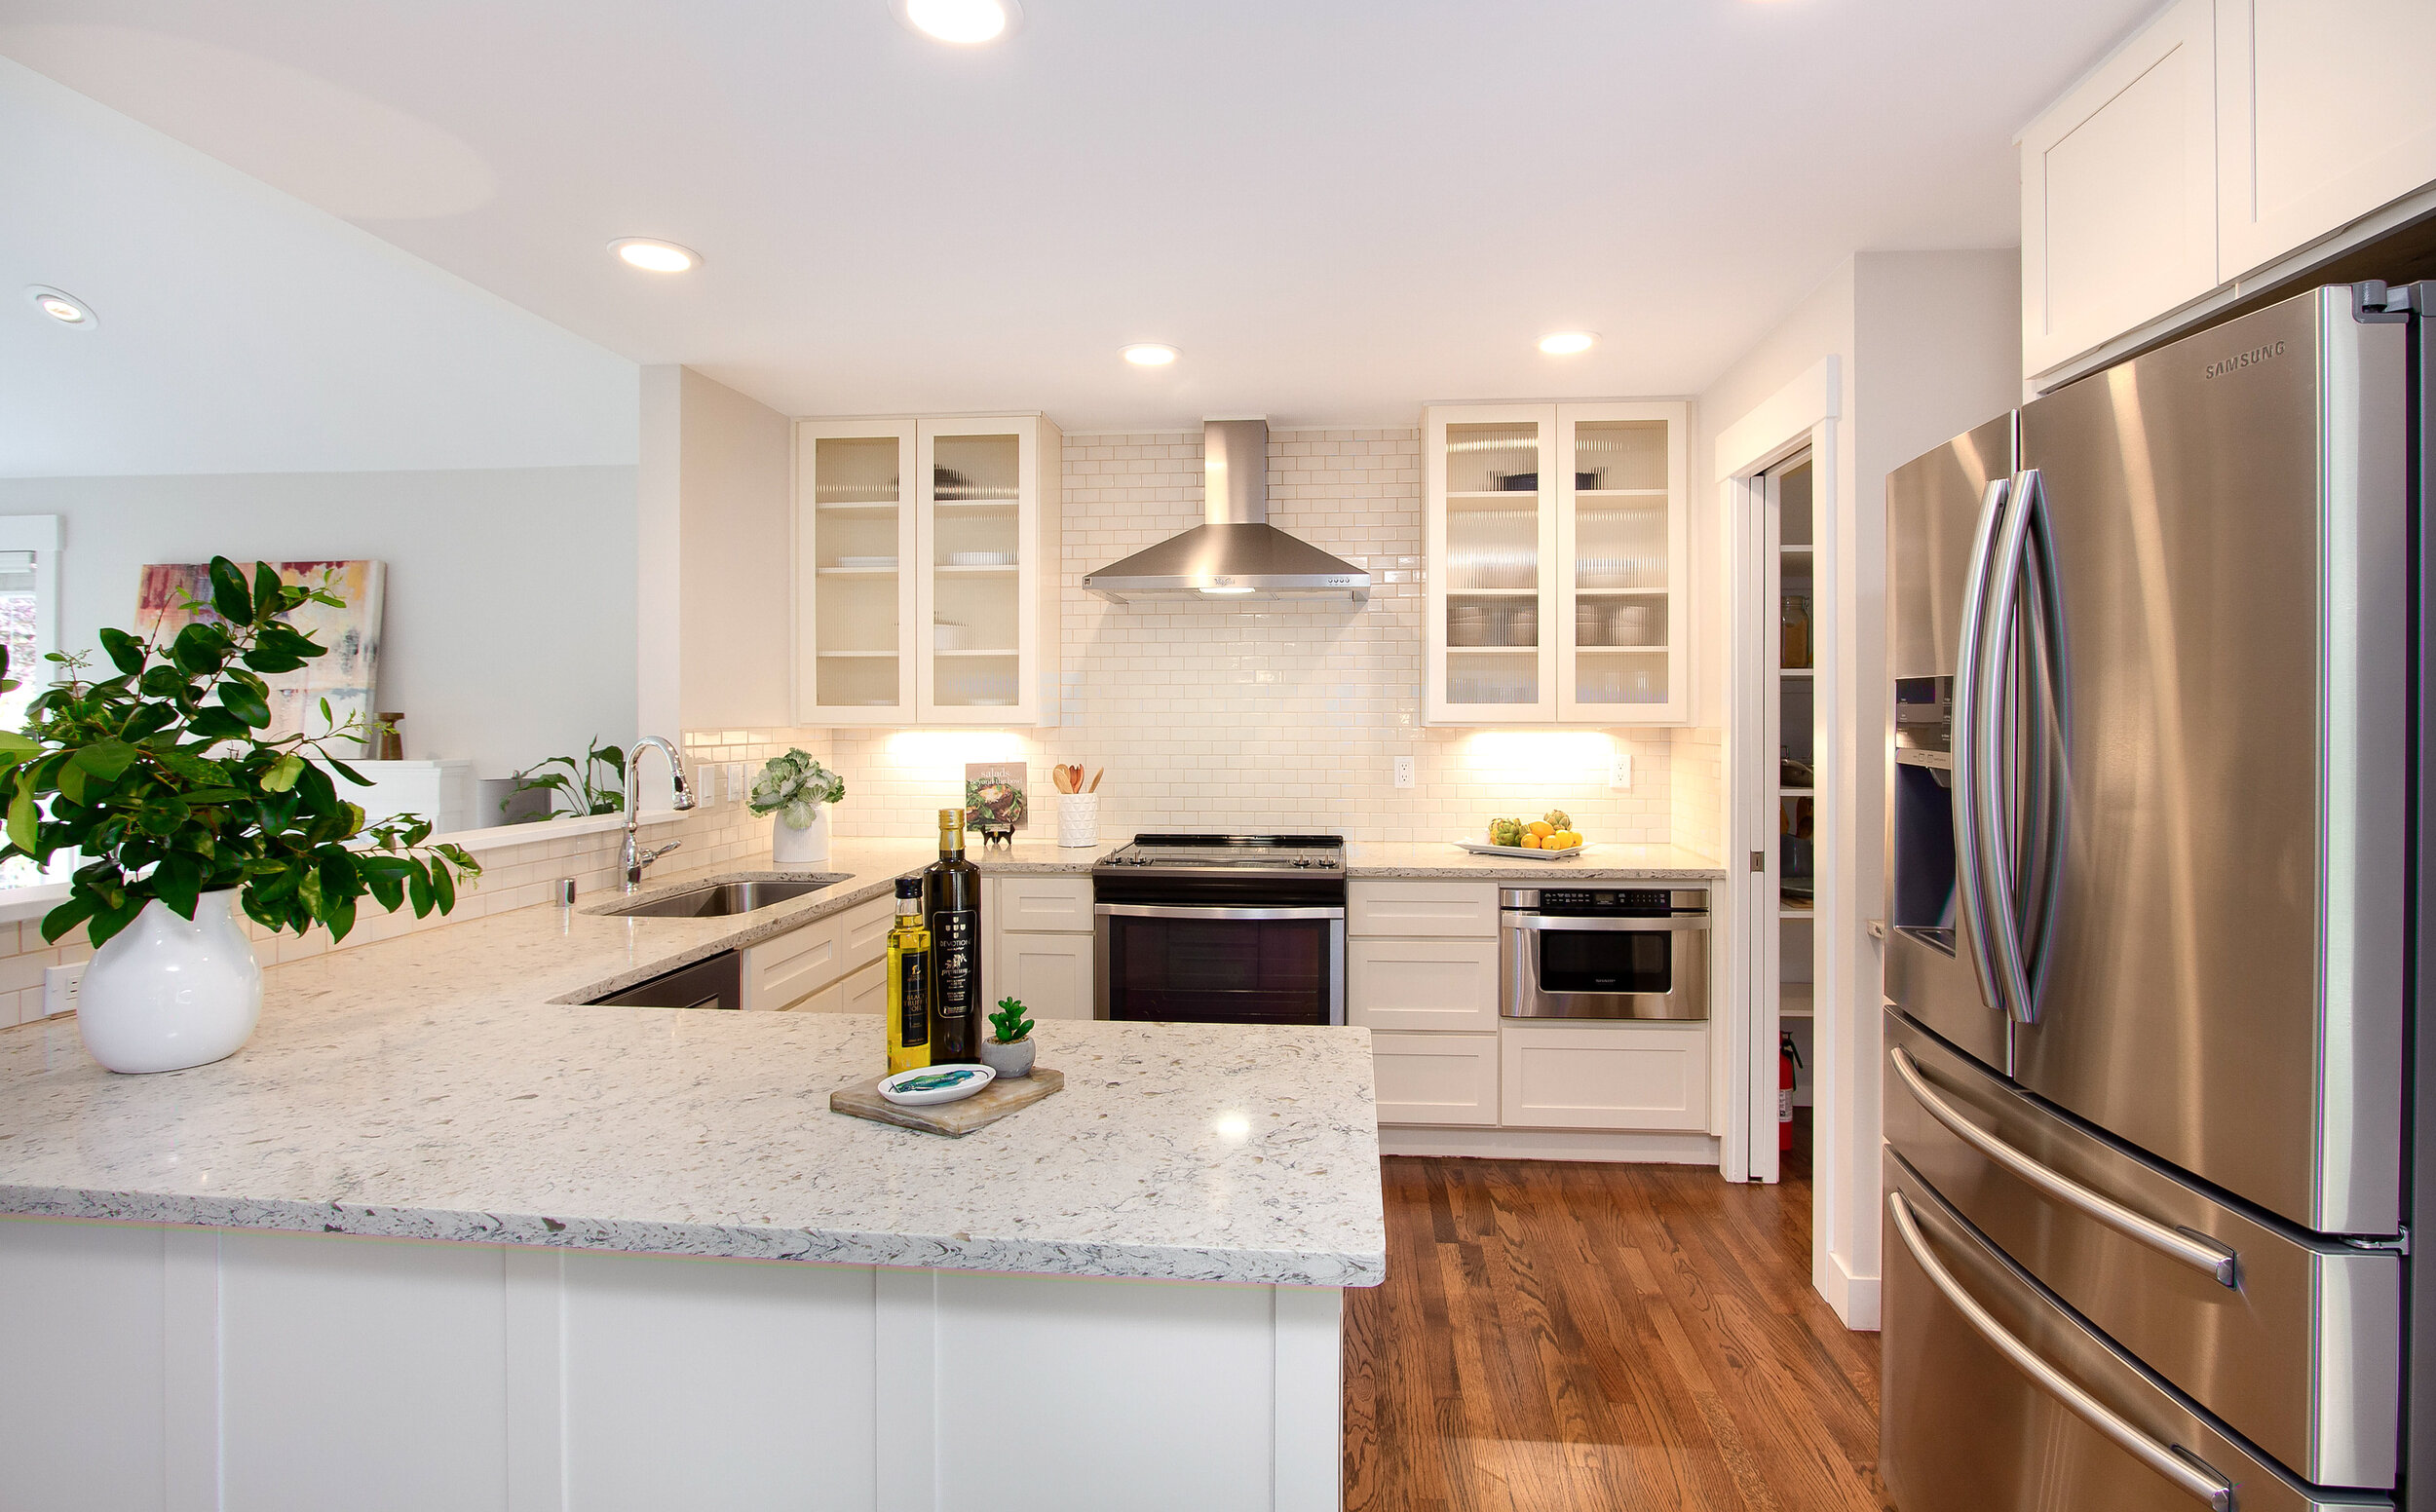  Enjoy this stunning kitchen, complete with beautiful white stone counters and updated stainless steel appliances, as you whip up a meal. 